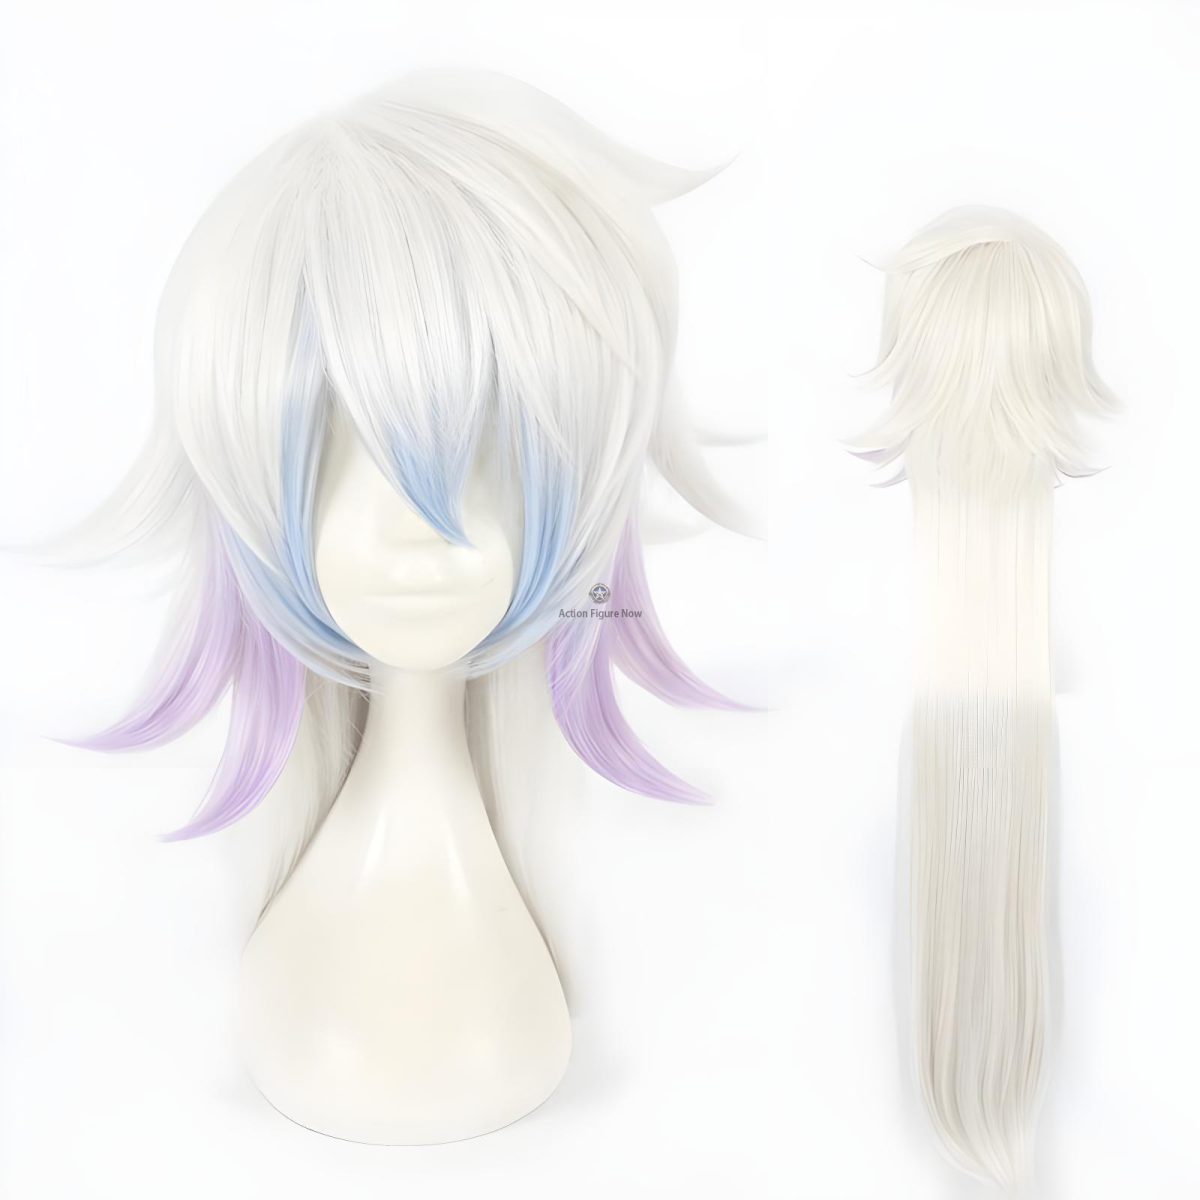 Merlin Cosplay Wig from Fate/Grand Order